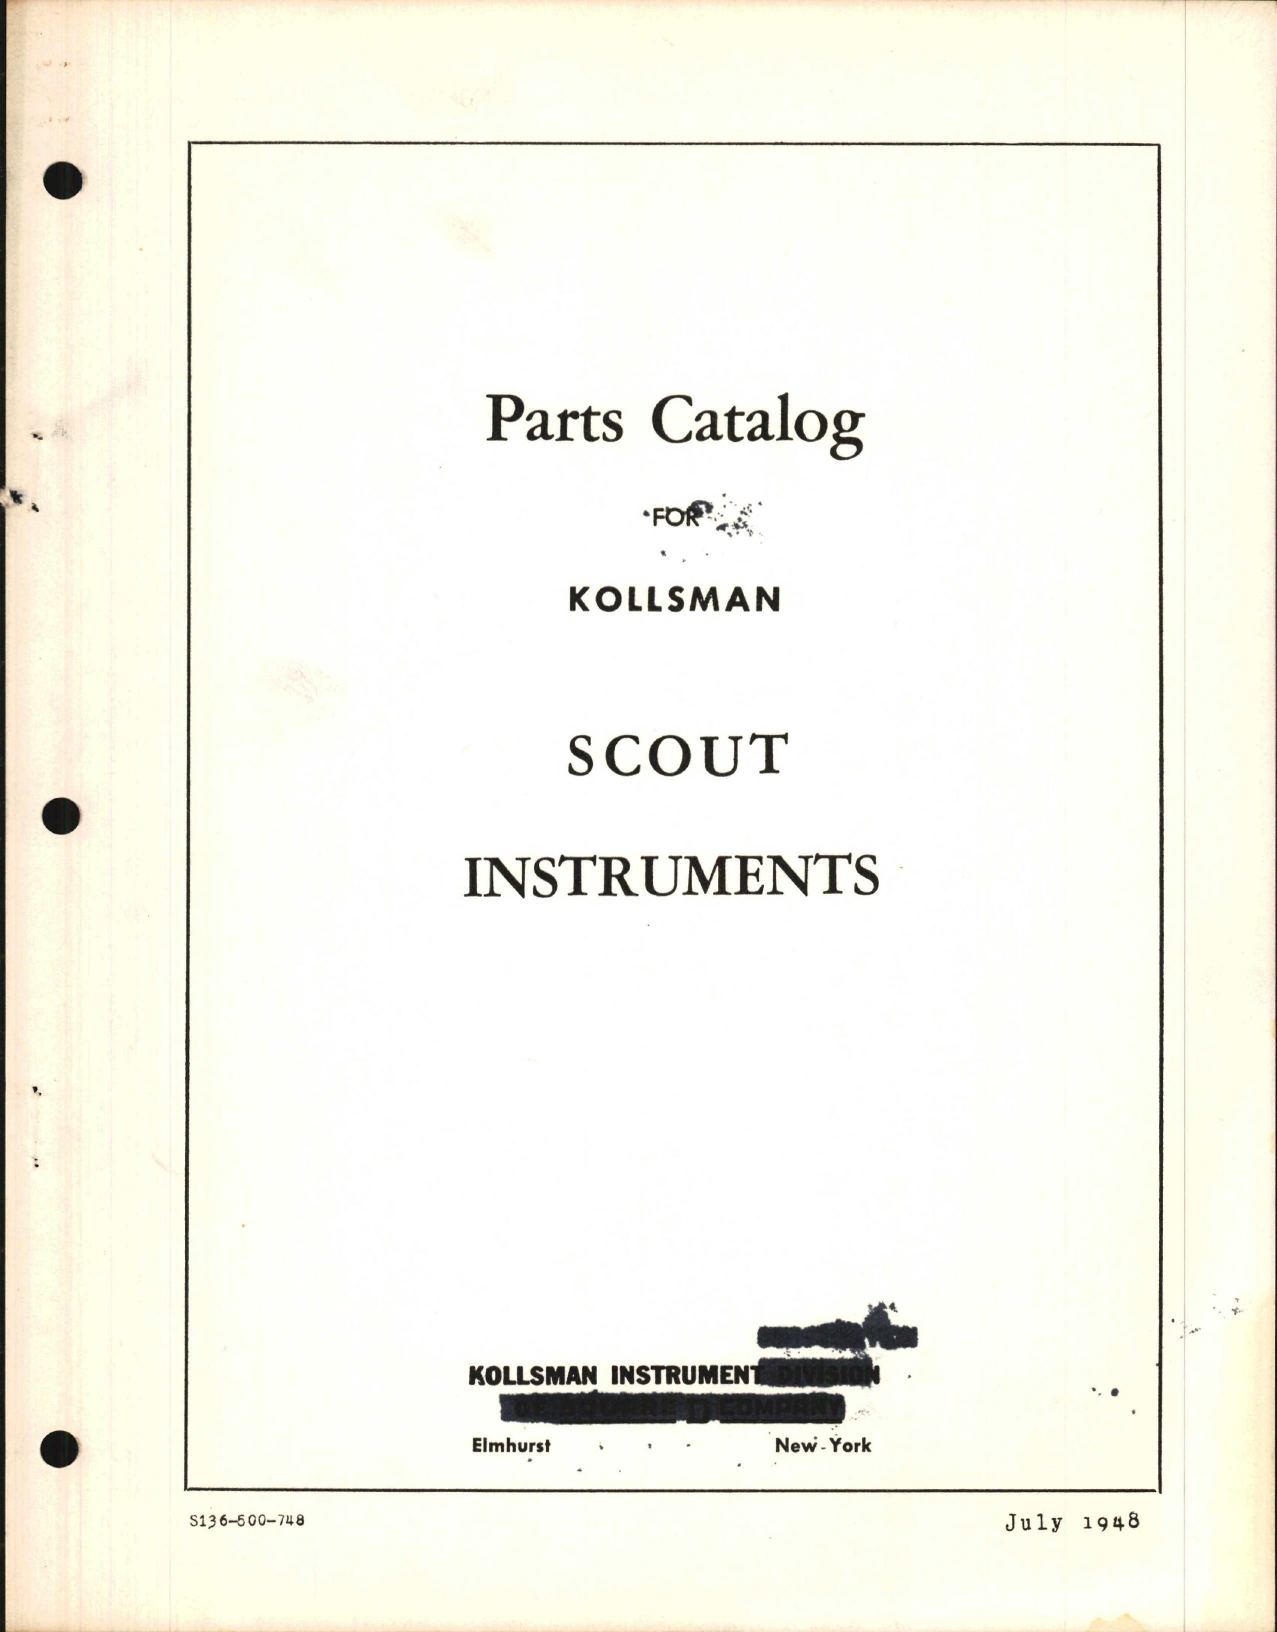 Sample page 1 from AirCorps Library document: Parts Catalog for Kollsman Scout Instruments